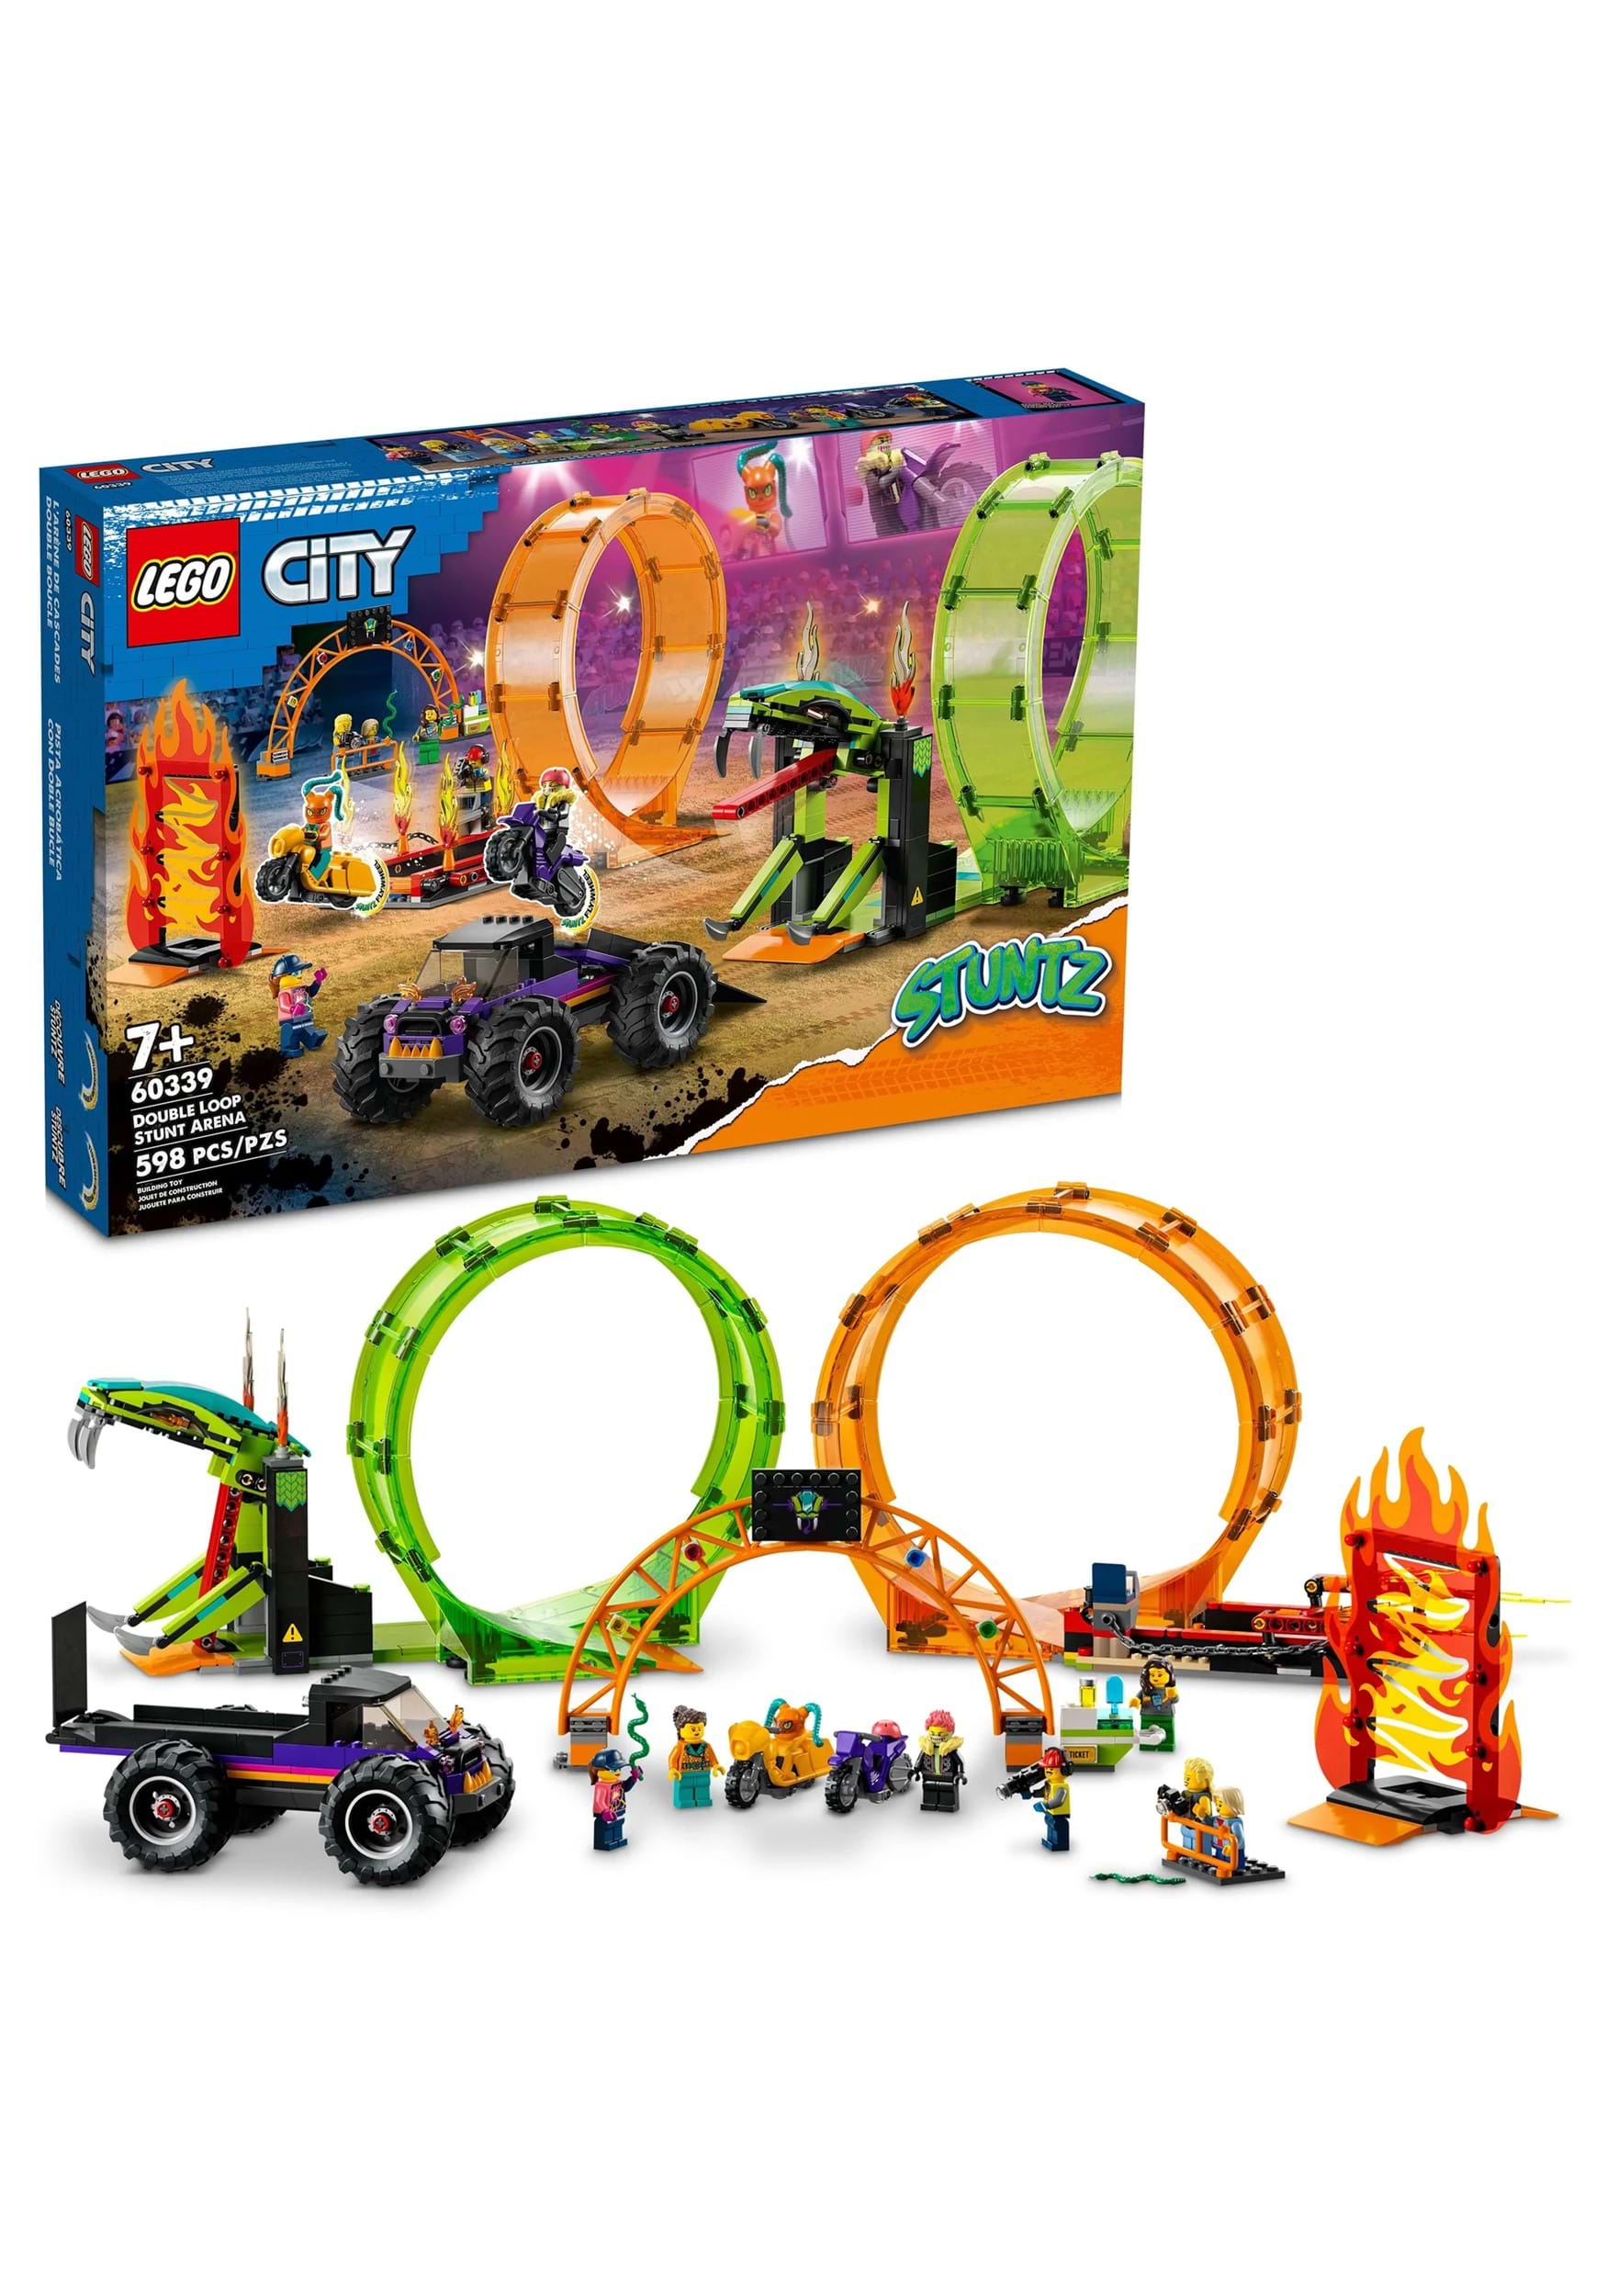 LEGO City Double Loop Stunt Arena Play Set For Kids